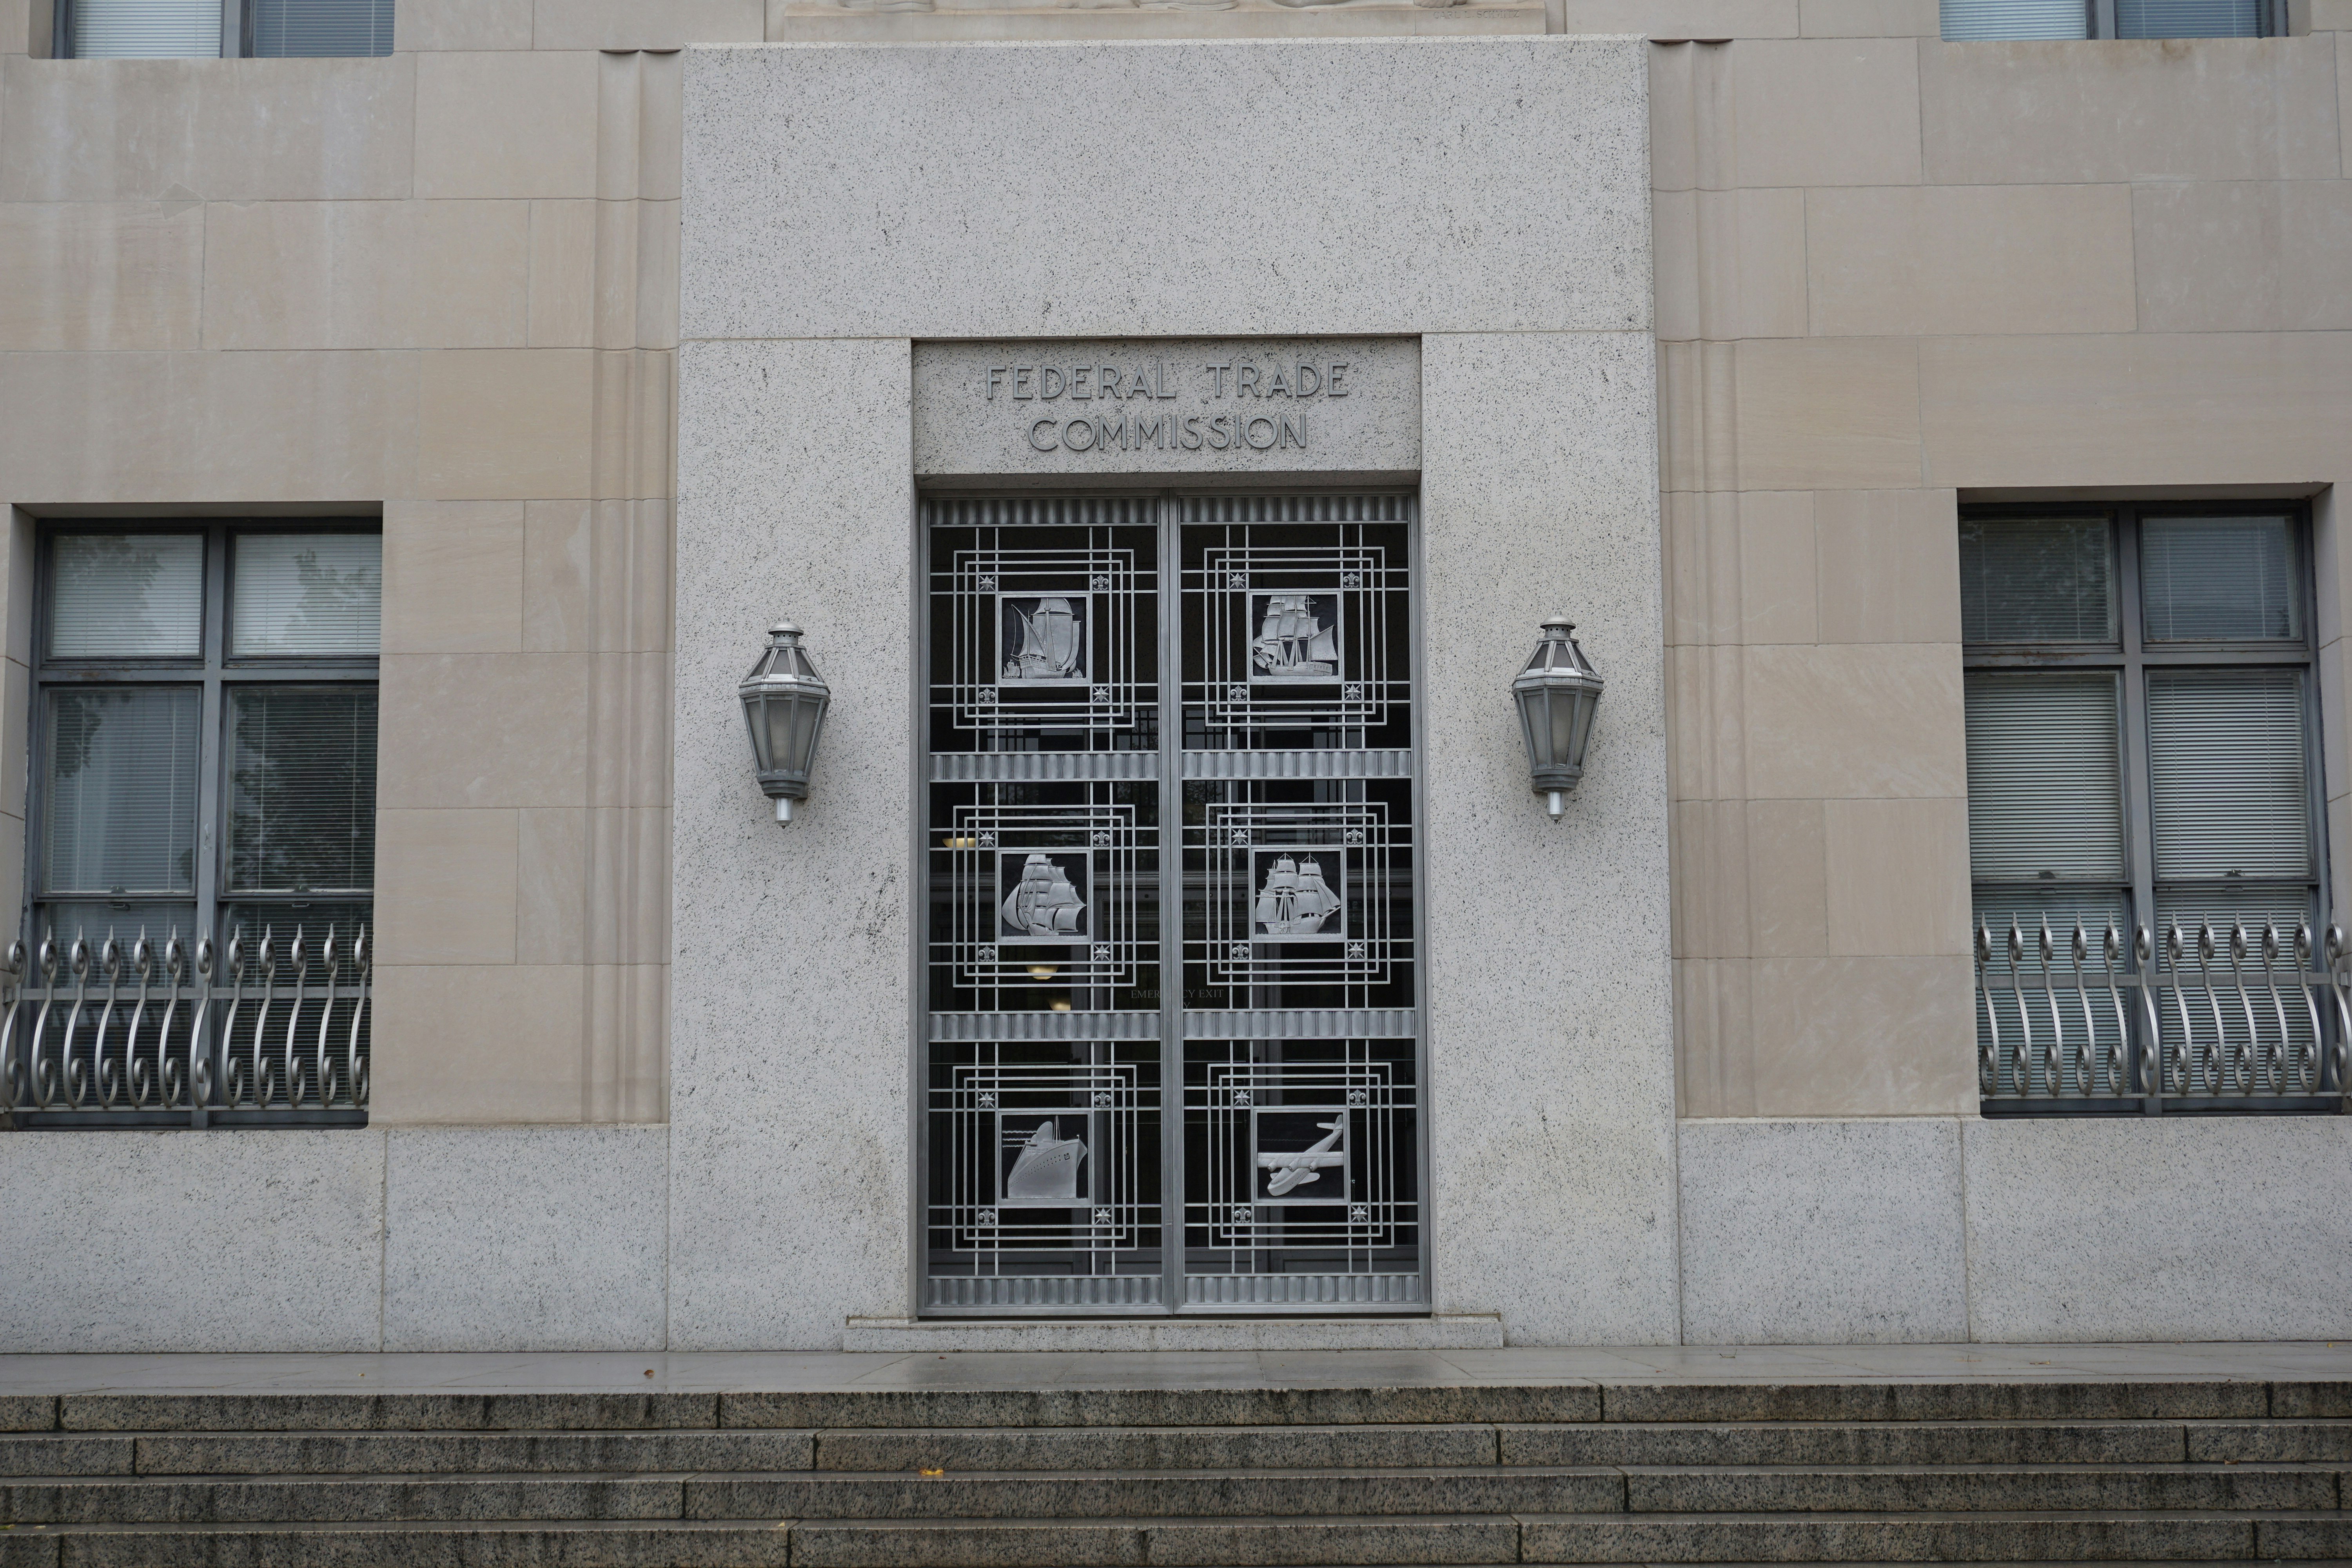 The Federal Trade Commission. 